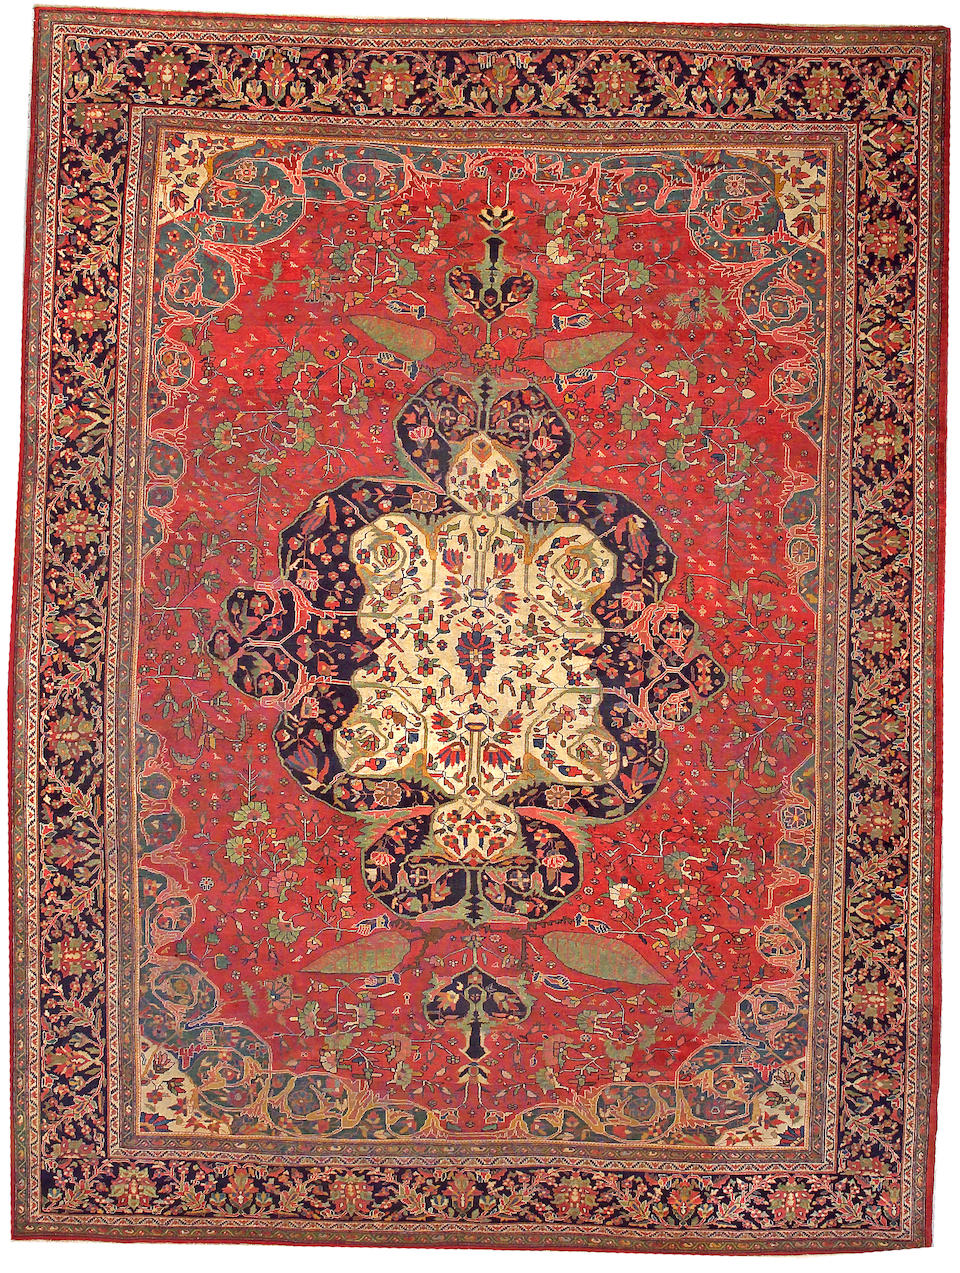 Bonhams A Fereghan Sarouk Rug Central Persia Size Approximately 10ft 2in X 13ft 6in